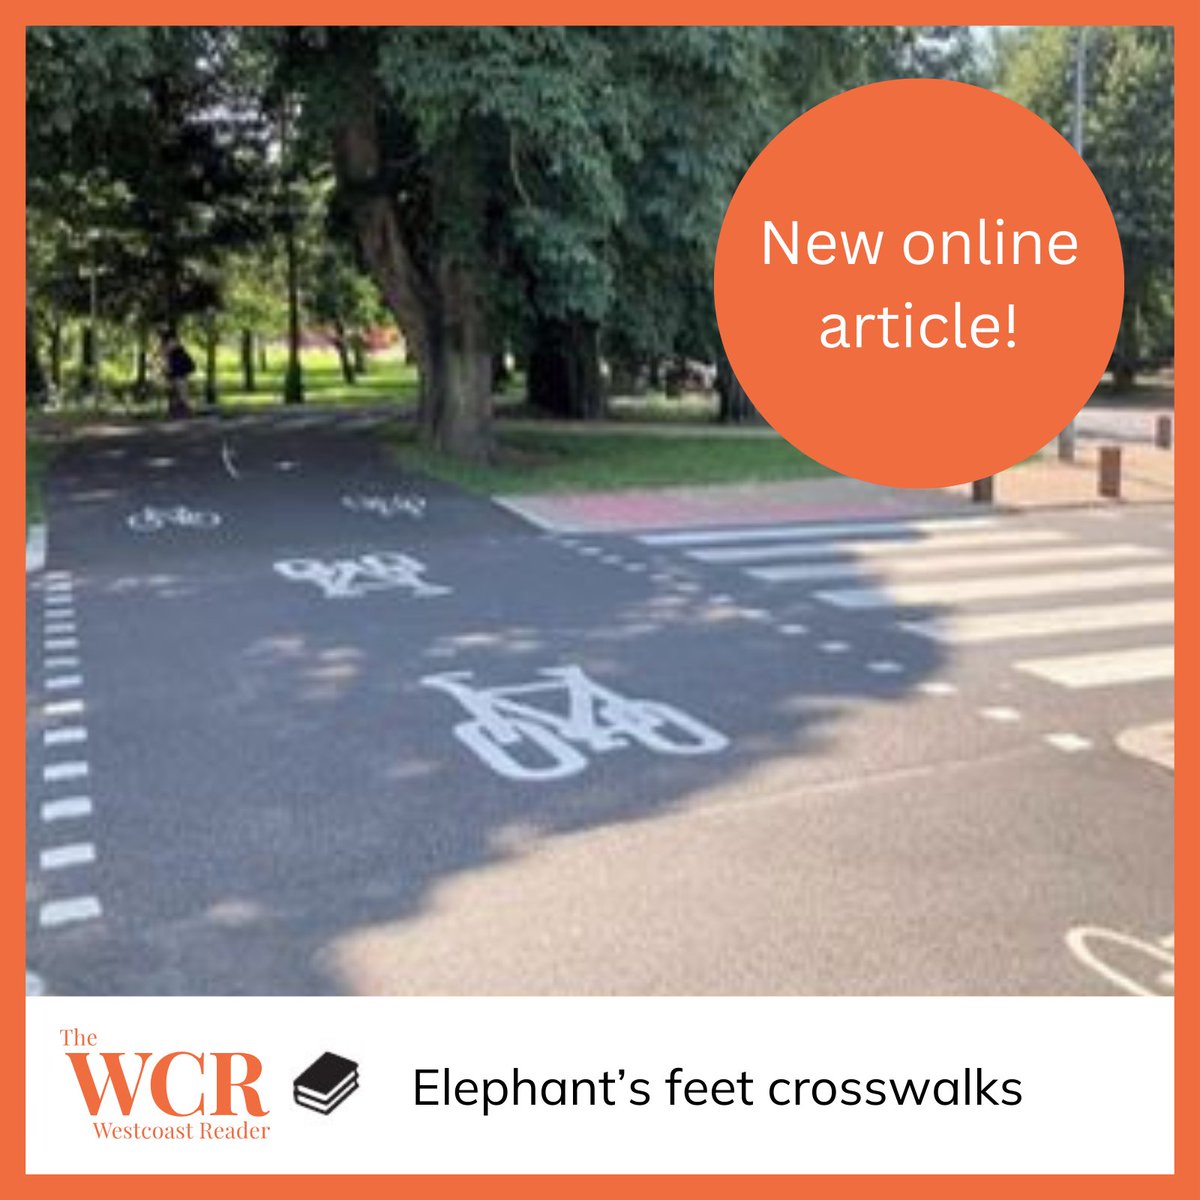 Have you seen these special crosswalks that help keep people on bikes and walking stay safe?
👉 Learn about them in this free Book Level 3 online article: thewestcoastreader.com/elephants-feet…

It comes with exercises, an online quiz and audio file!
#Newspaper #AdultLiteracy #DigitalNews